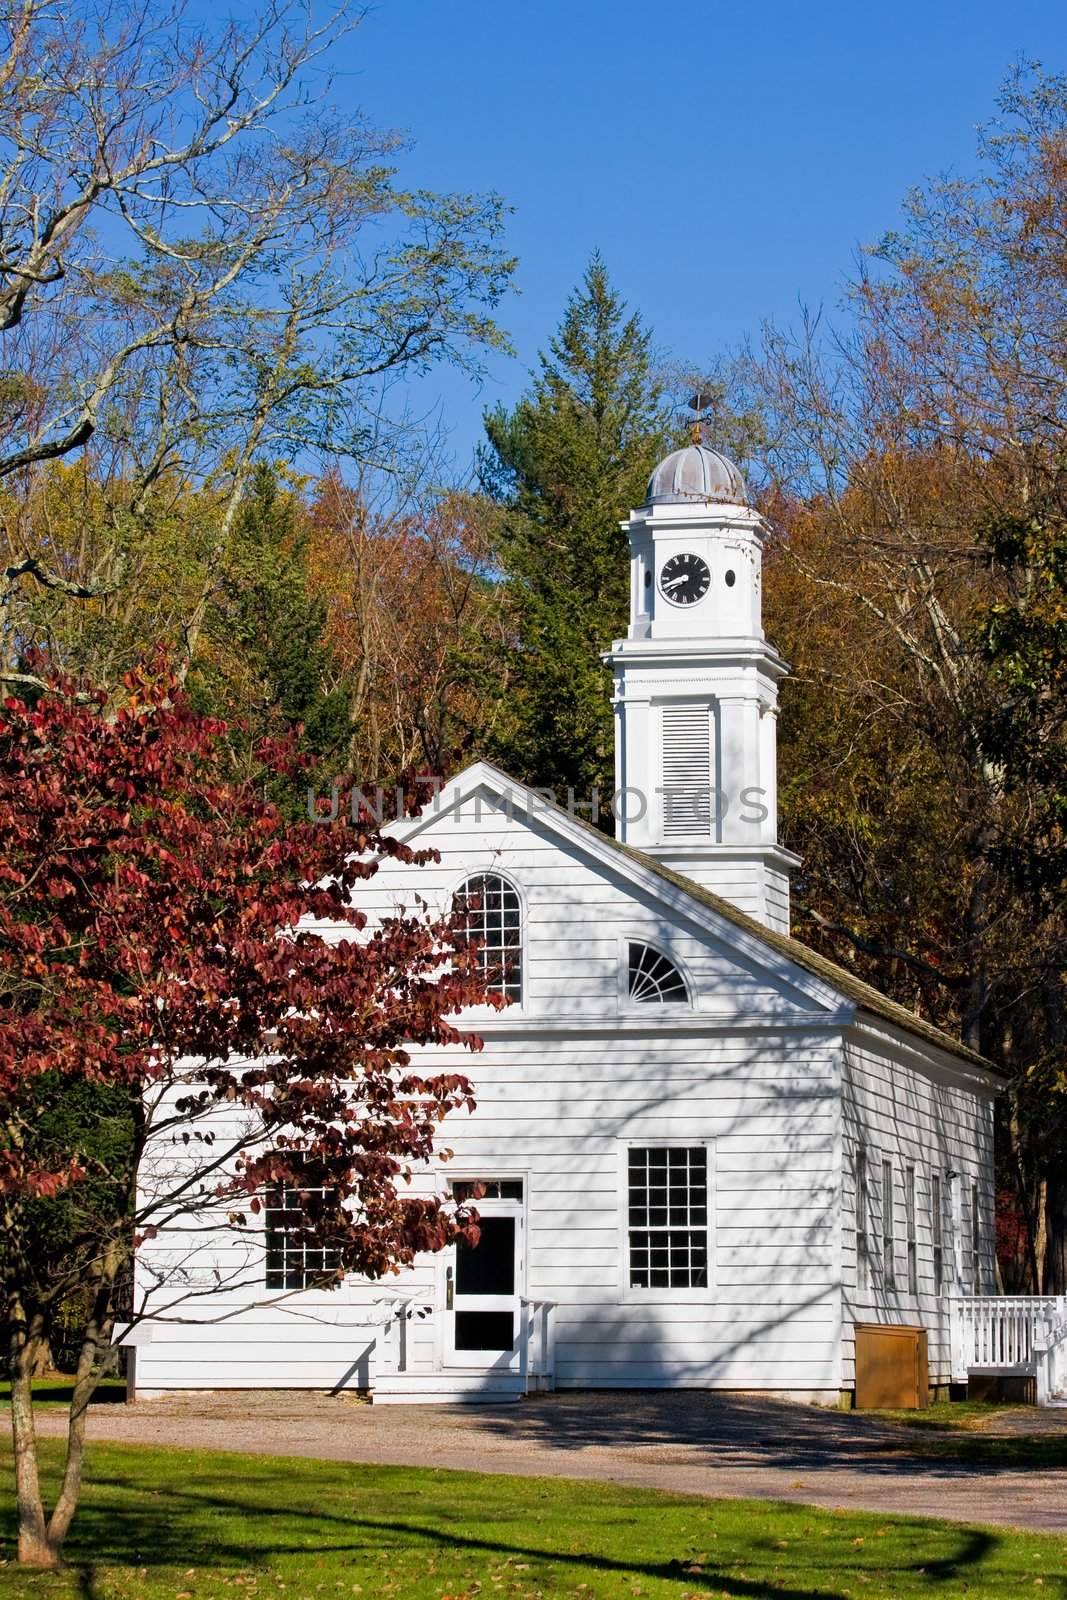 An old, restored church in Allaire Village, New Jersey. Allaire village was a bog iron industry town in New Jersey during the early 19th century.